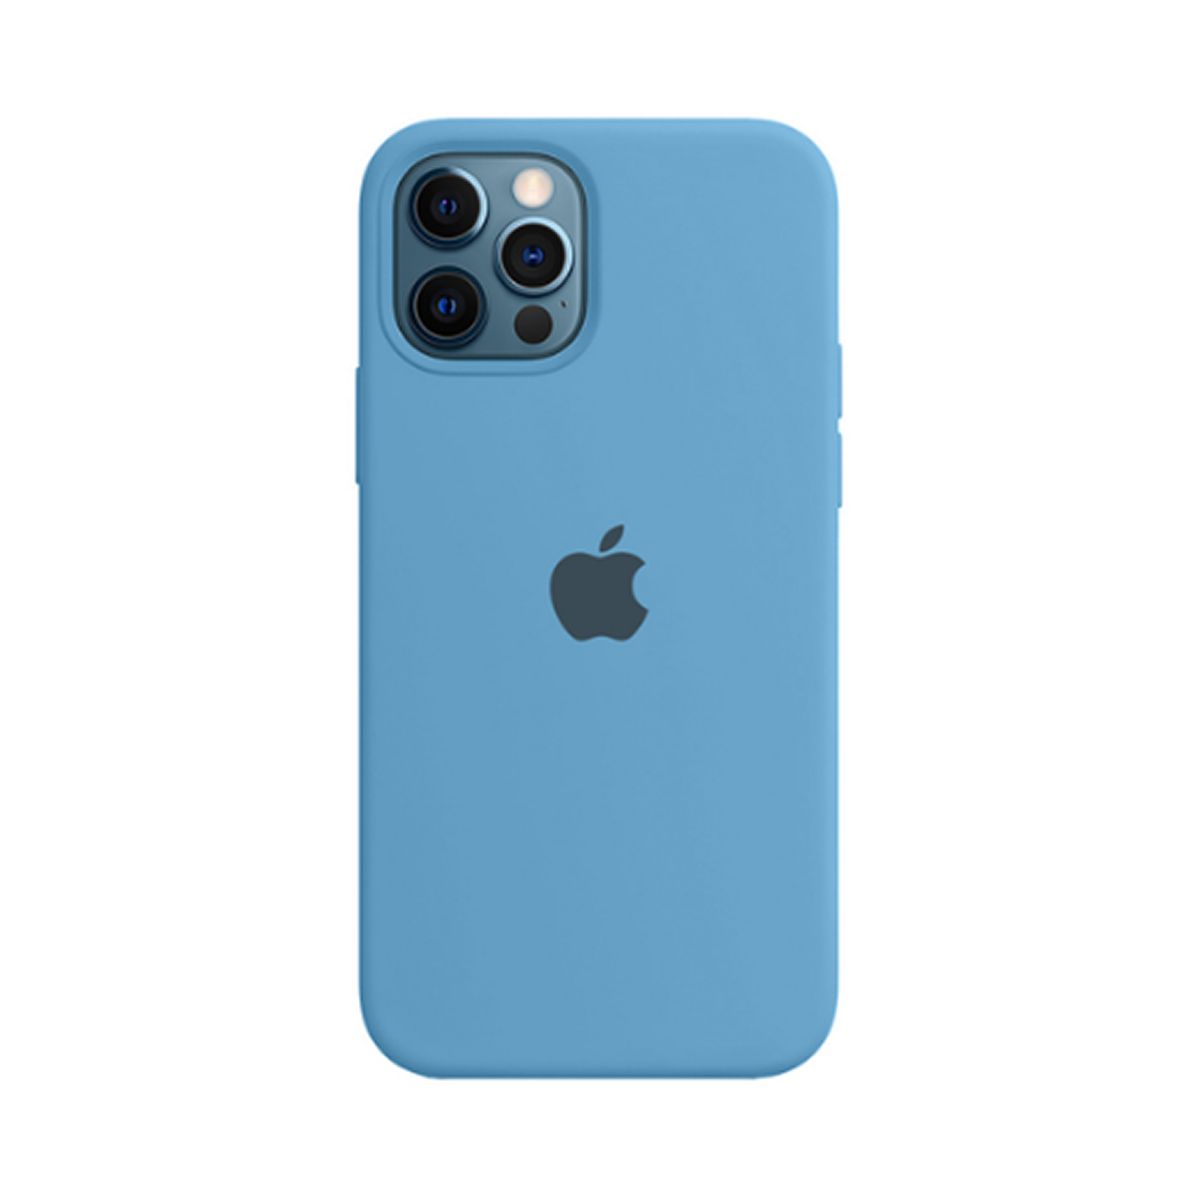 CASE CAPINHA IPHONE 12 PRO MAX SILICONE AZUL | MCELL IMPORT